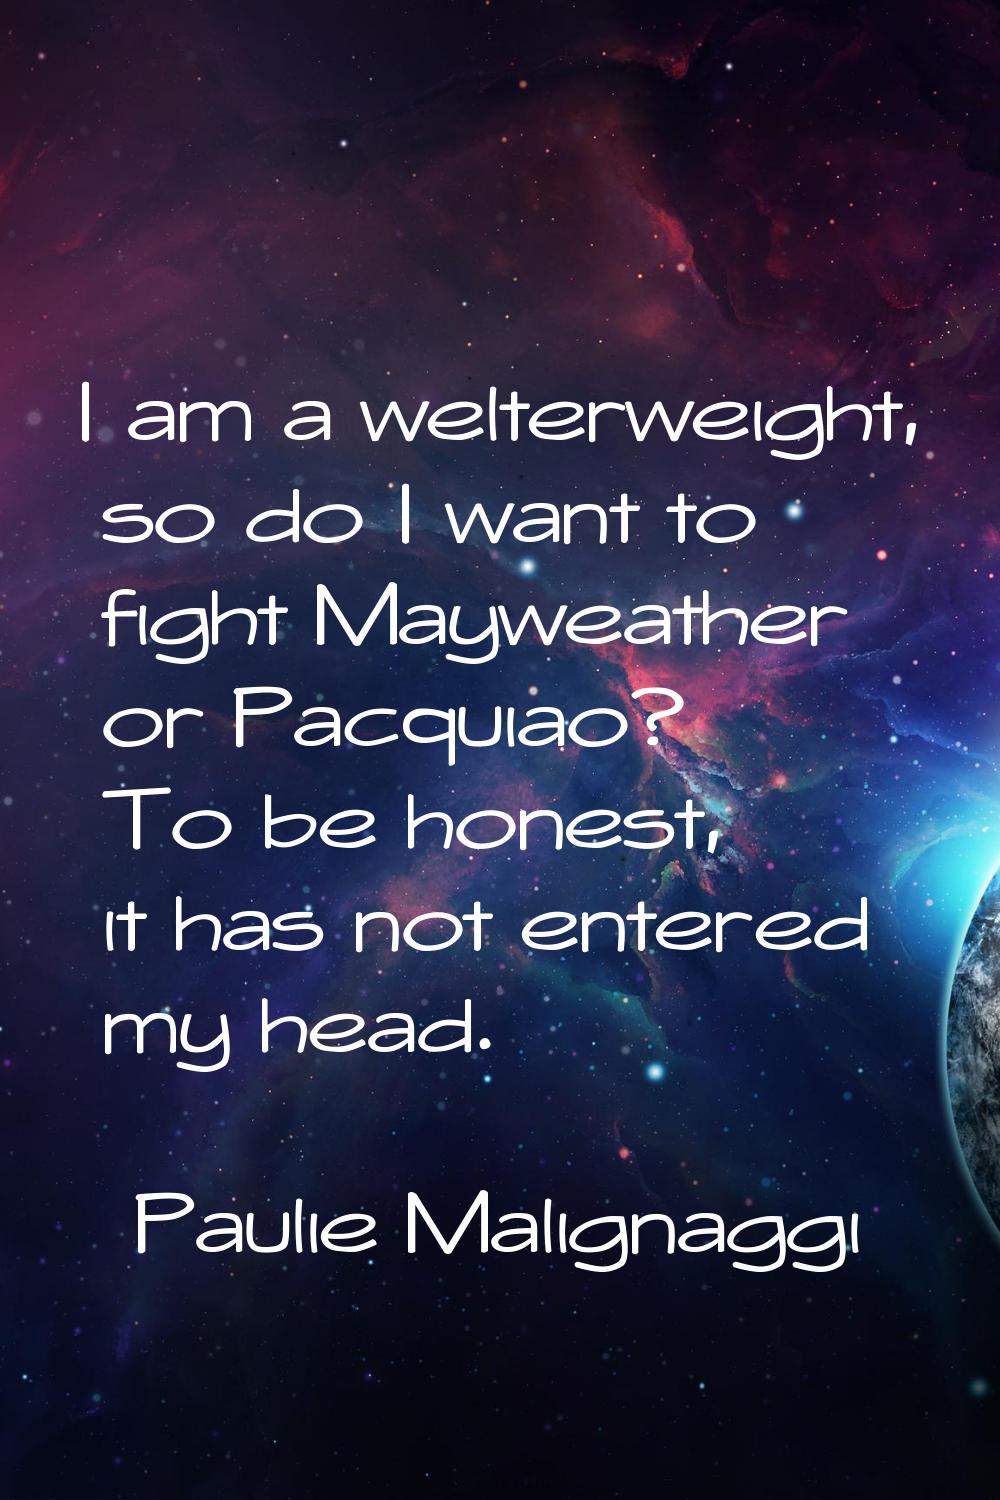 I am a welterweight, so do I want to fight Mayweather or Pacquiao? To be honest, it has not entered